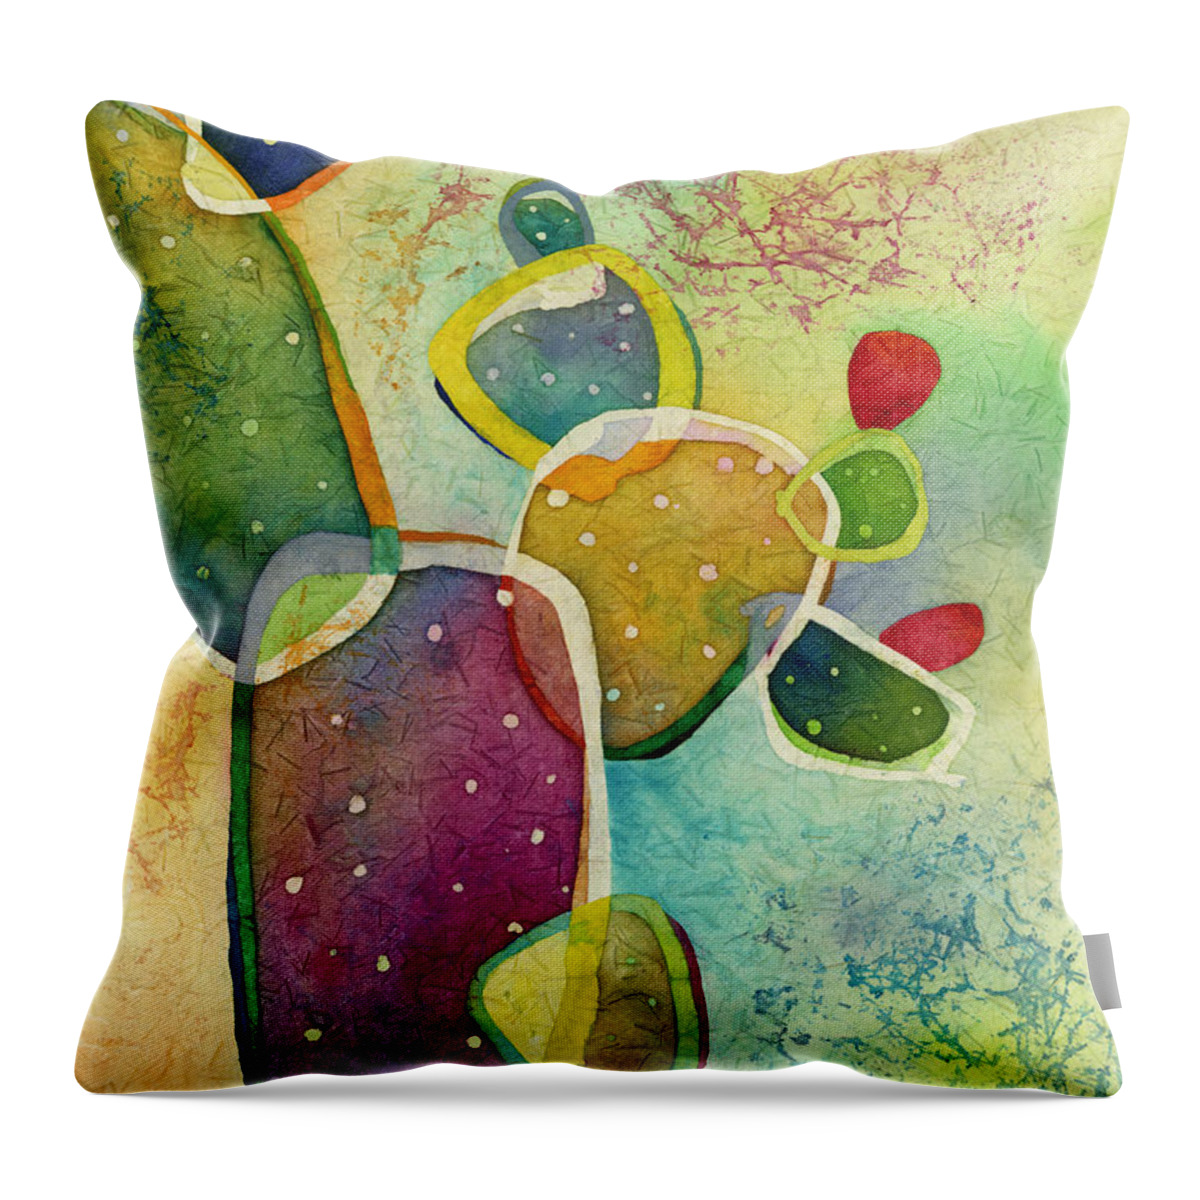 Cactus Throw Pillow featuring the painting Prickly Pizazz 5 by Hailey E Herrera